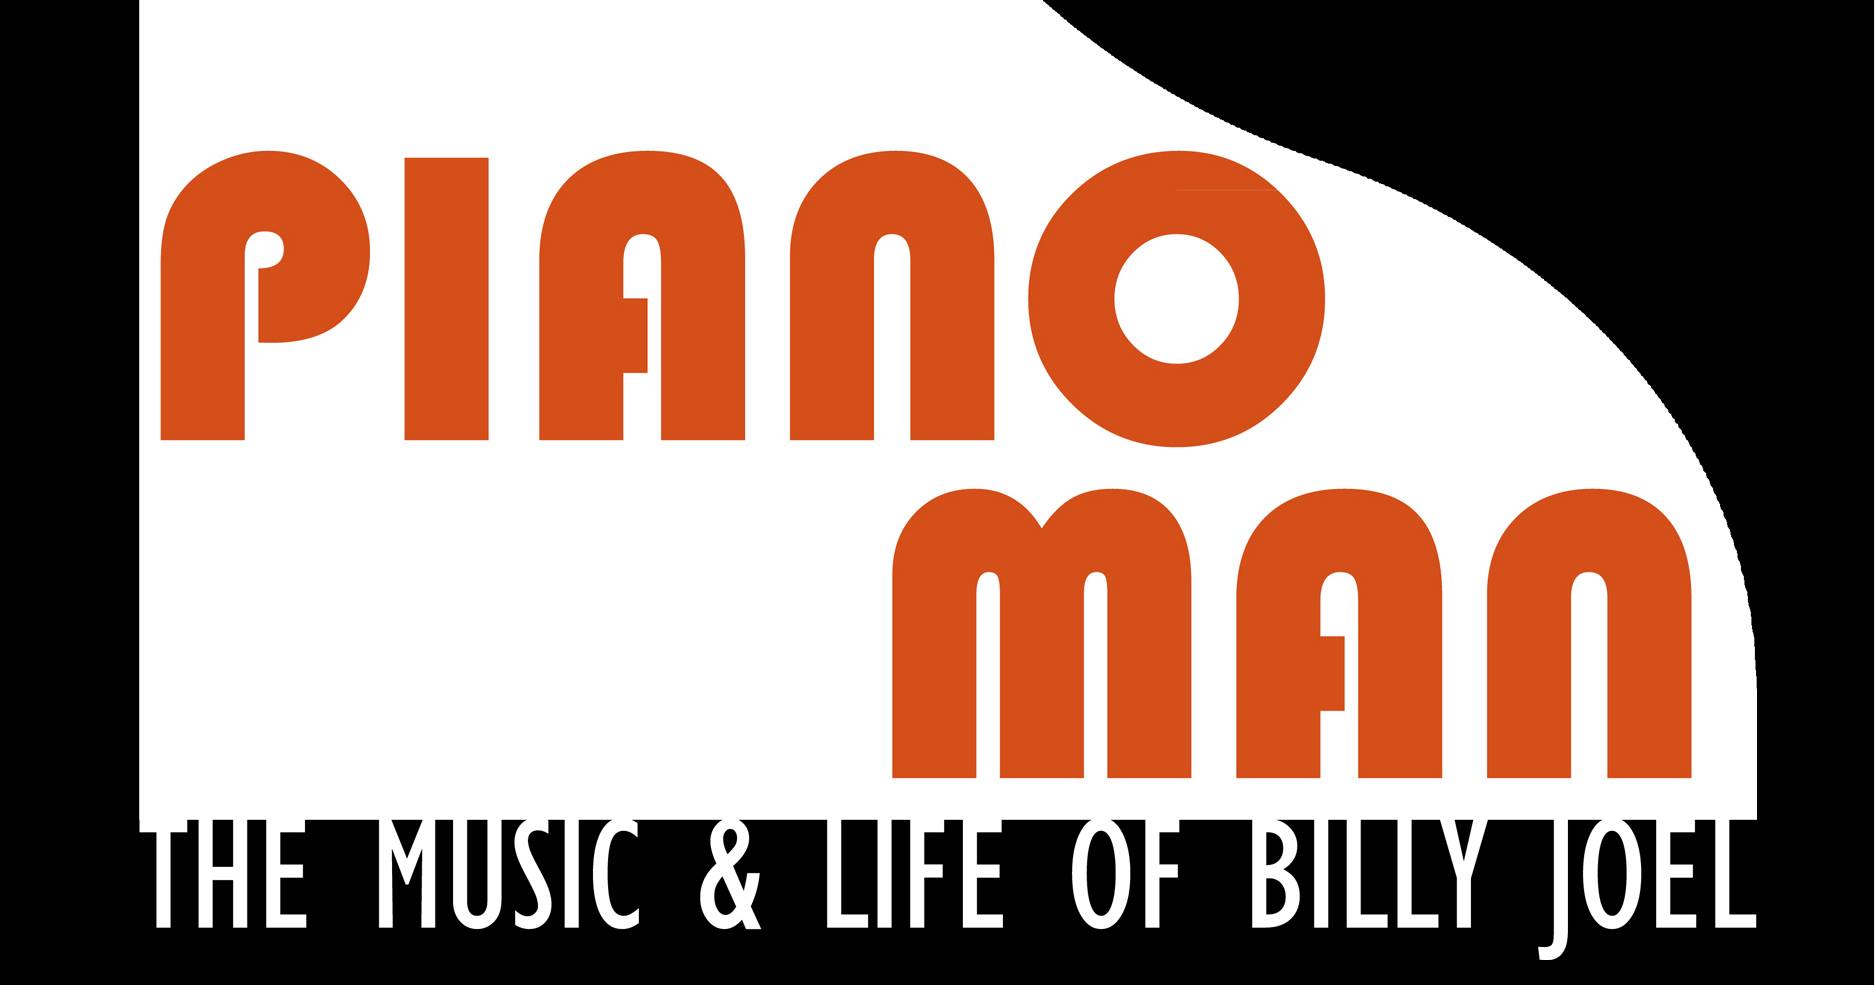 Piano Man - The Music and Life of Billy Joel: A Dinner Theatre